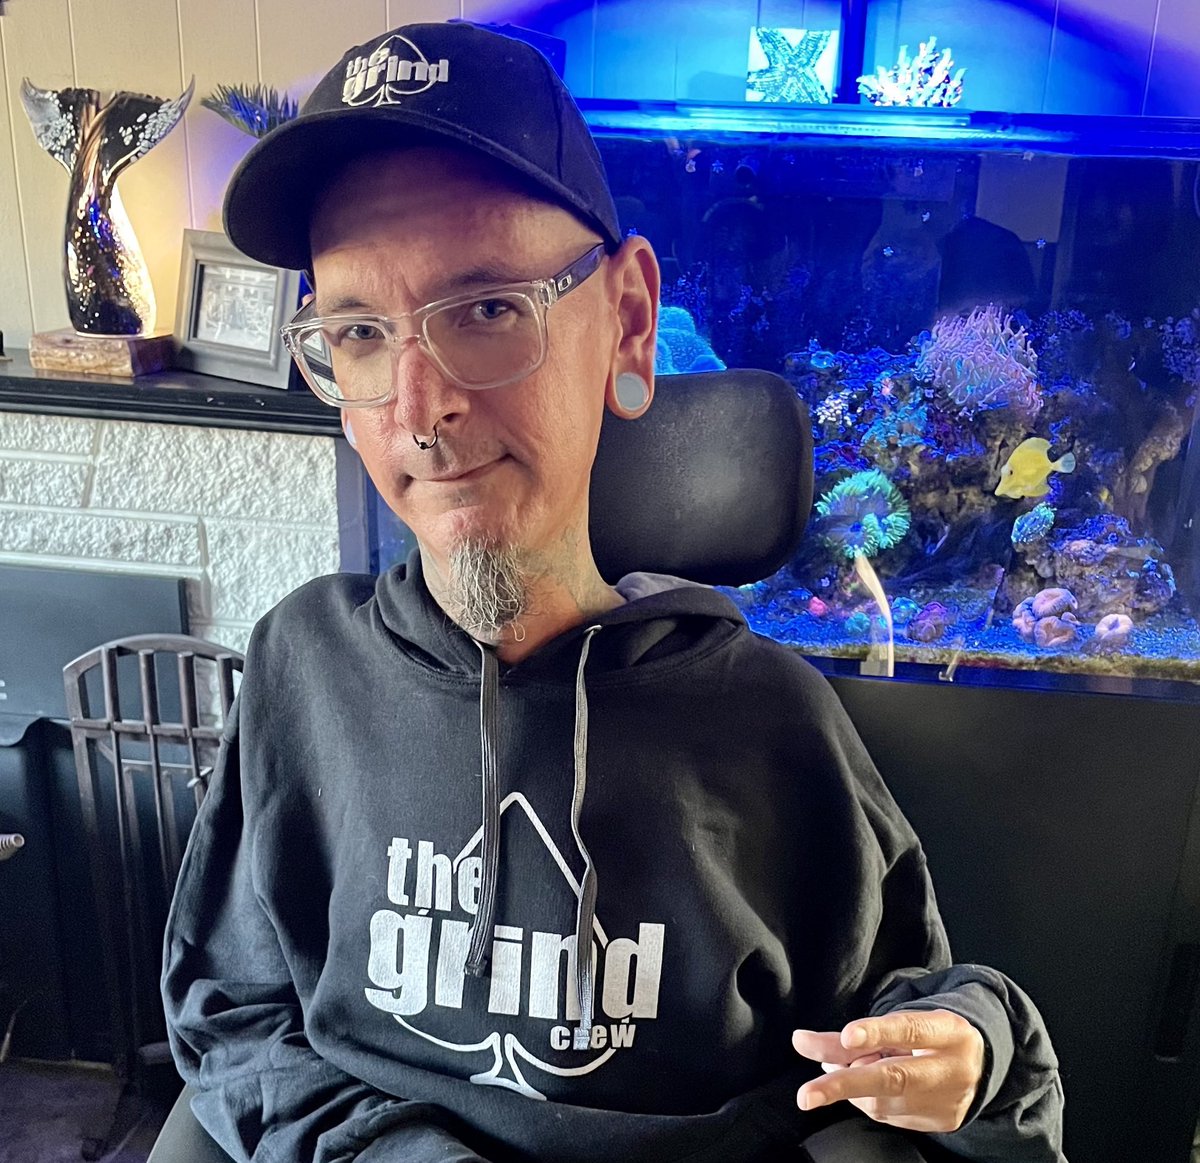 TheGrindCrew: #TheGrindCrew’s
Sponsored  #streamer

@HandicapHamb0ne is #streaming right now 

Crushing the #Poker tables on @ACR_POKER 

Check them out here👇
twitch.tv/handicaphamb0ne

#GetWet